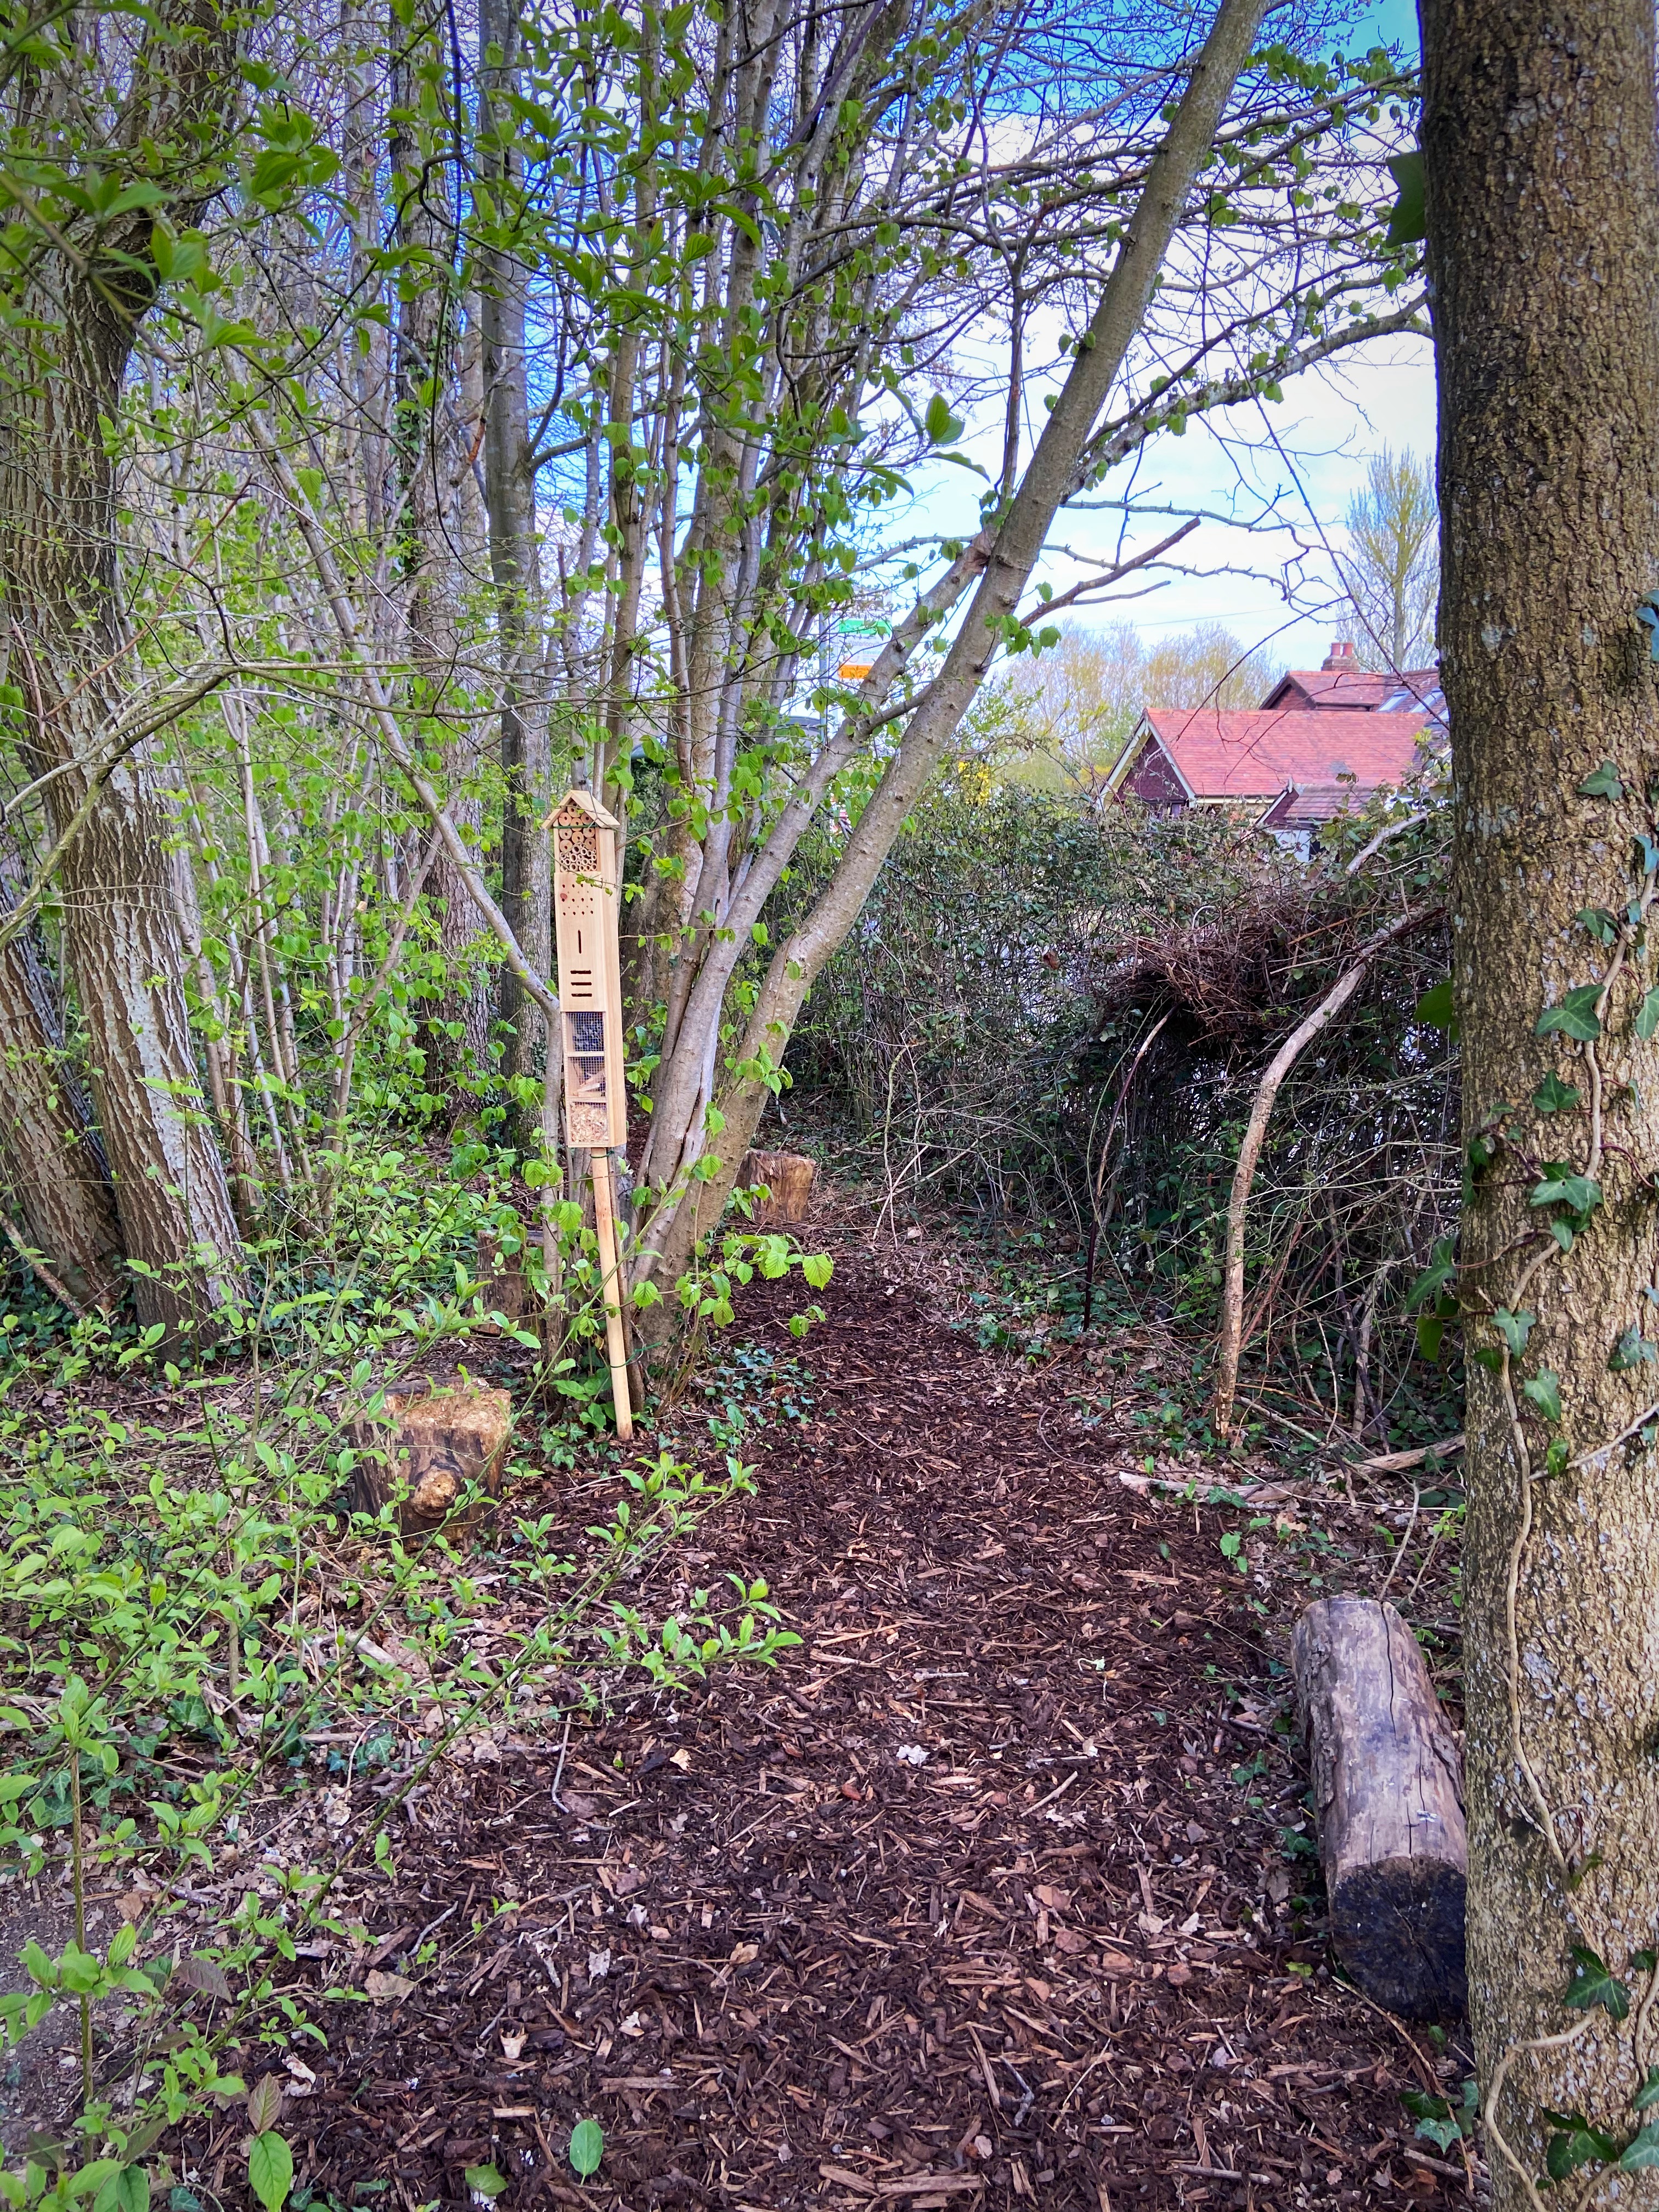 A Woody Walk has been created on the school grounds to allow children to surround themselves with nature and realise how to appreciate and respect it